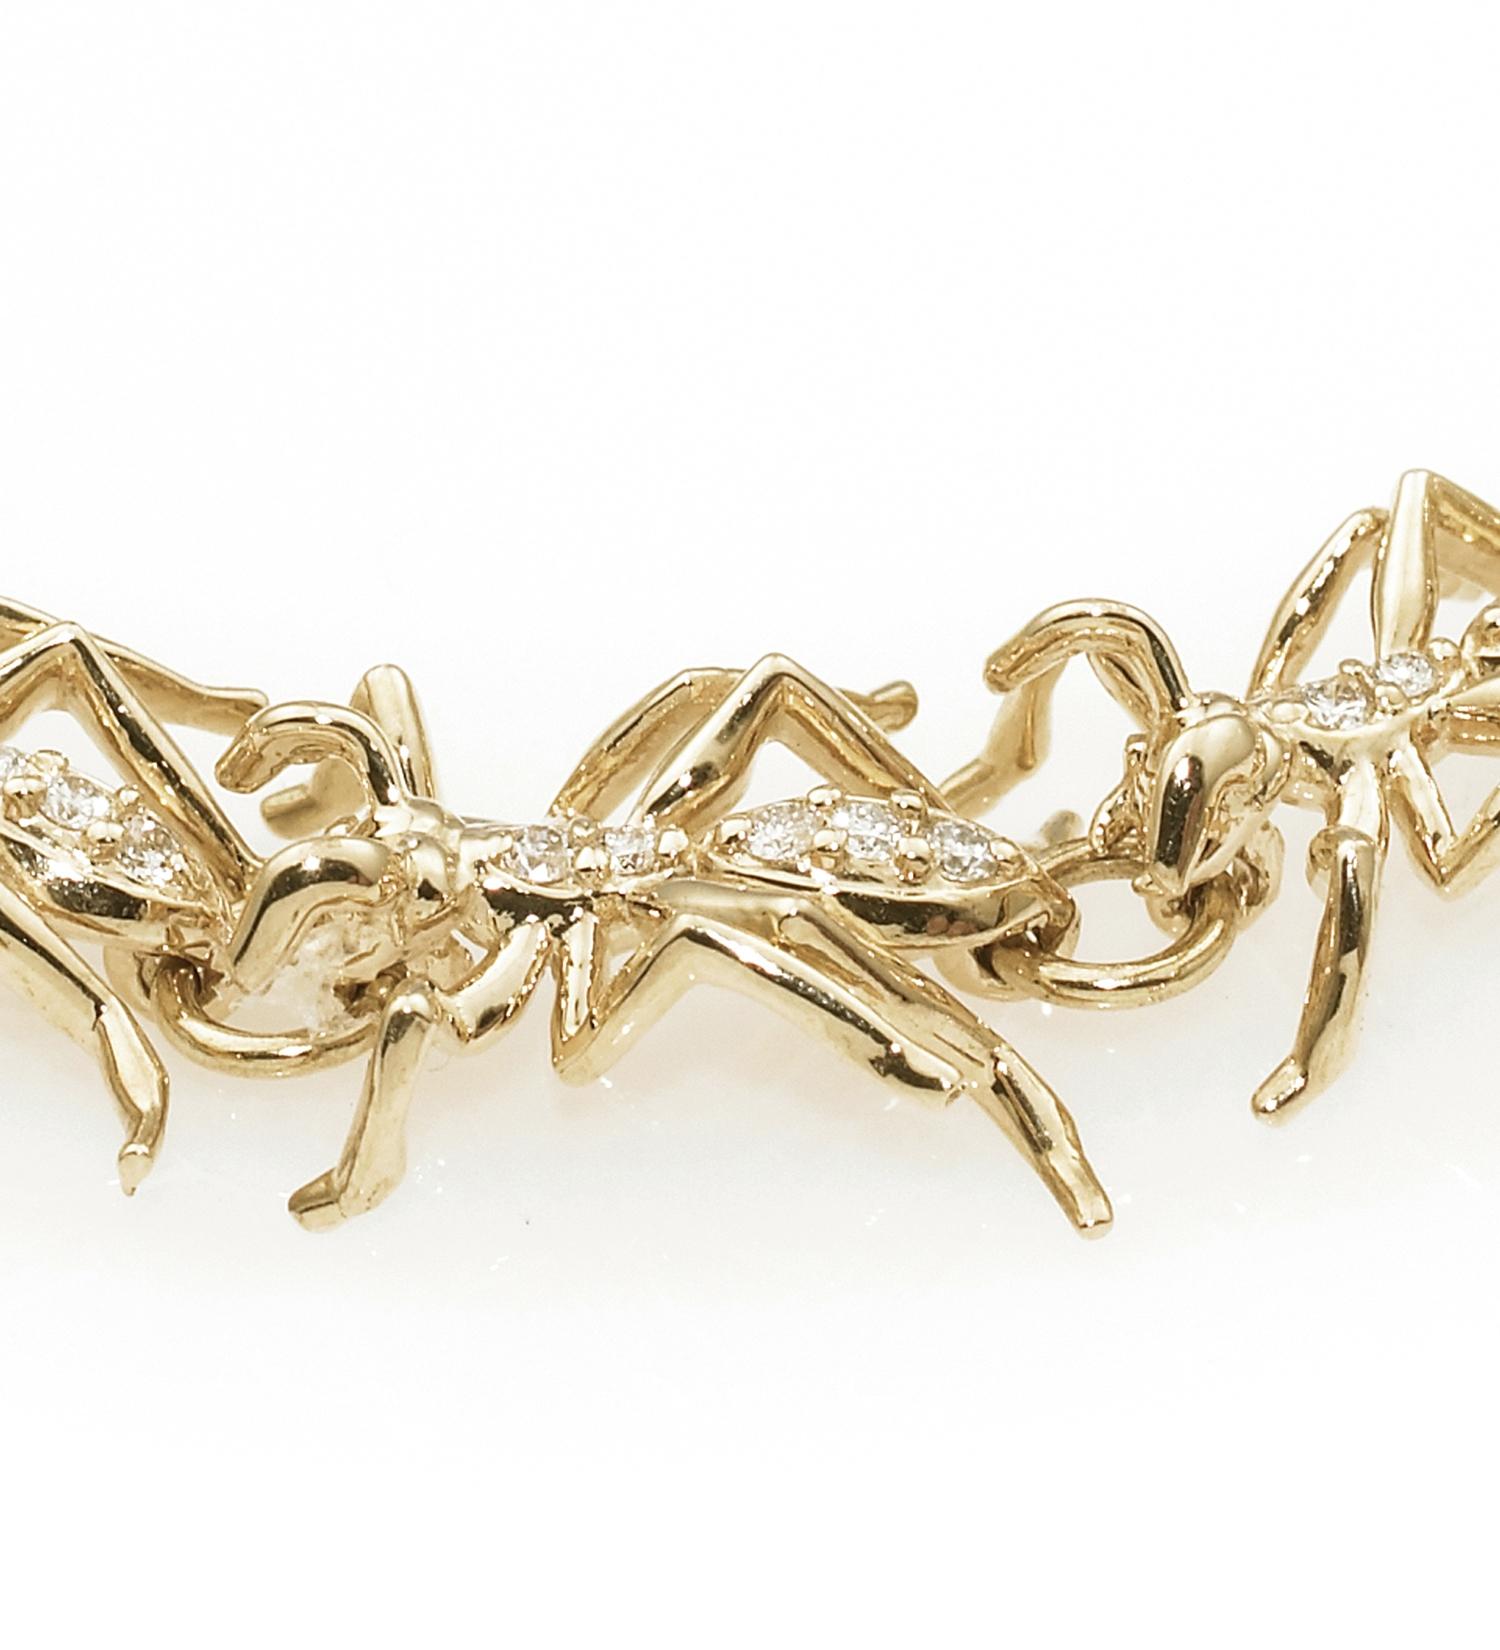 Introducing the remarkable 13 Ants 7-Inch Bracelet, an exquisite piece of jewelry that seamlessly blends artistry and luxury. Crafted from 14k yellow gold, this limited edition bracelet features a valiant brigade of marching ants, each one